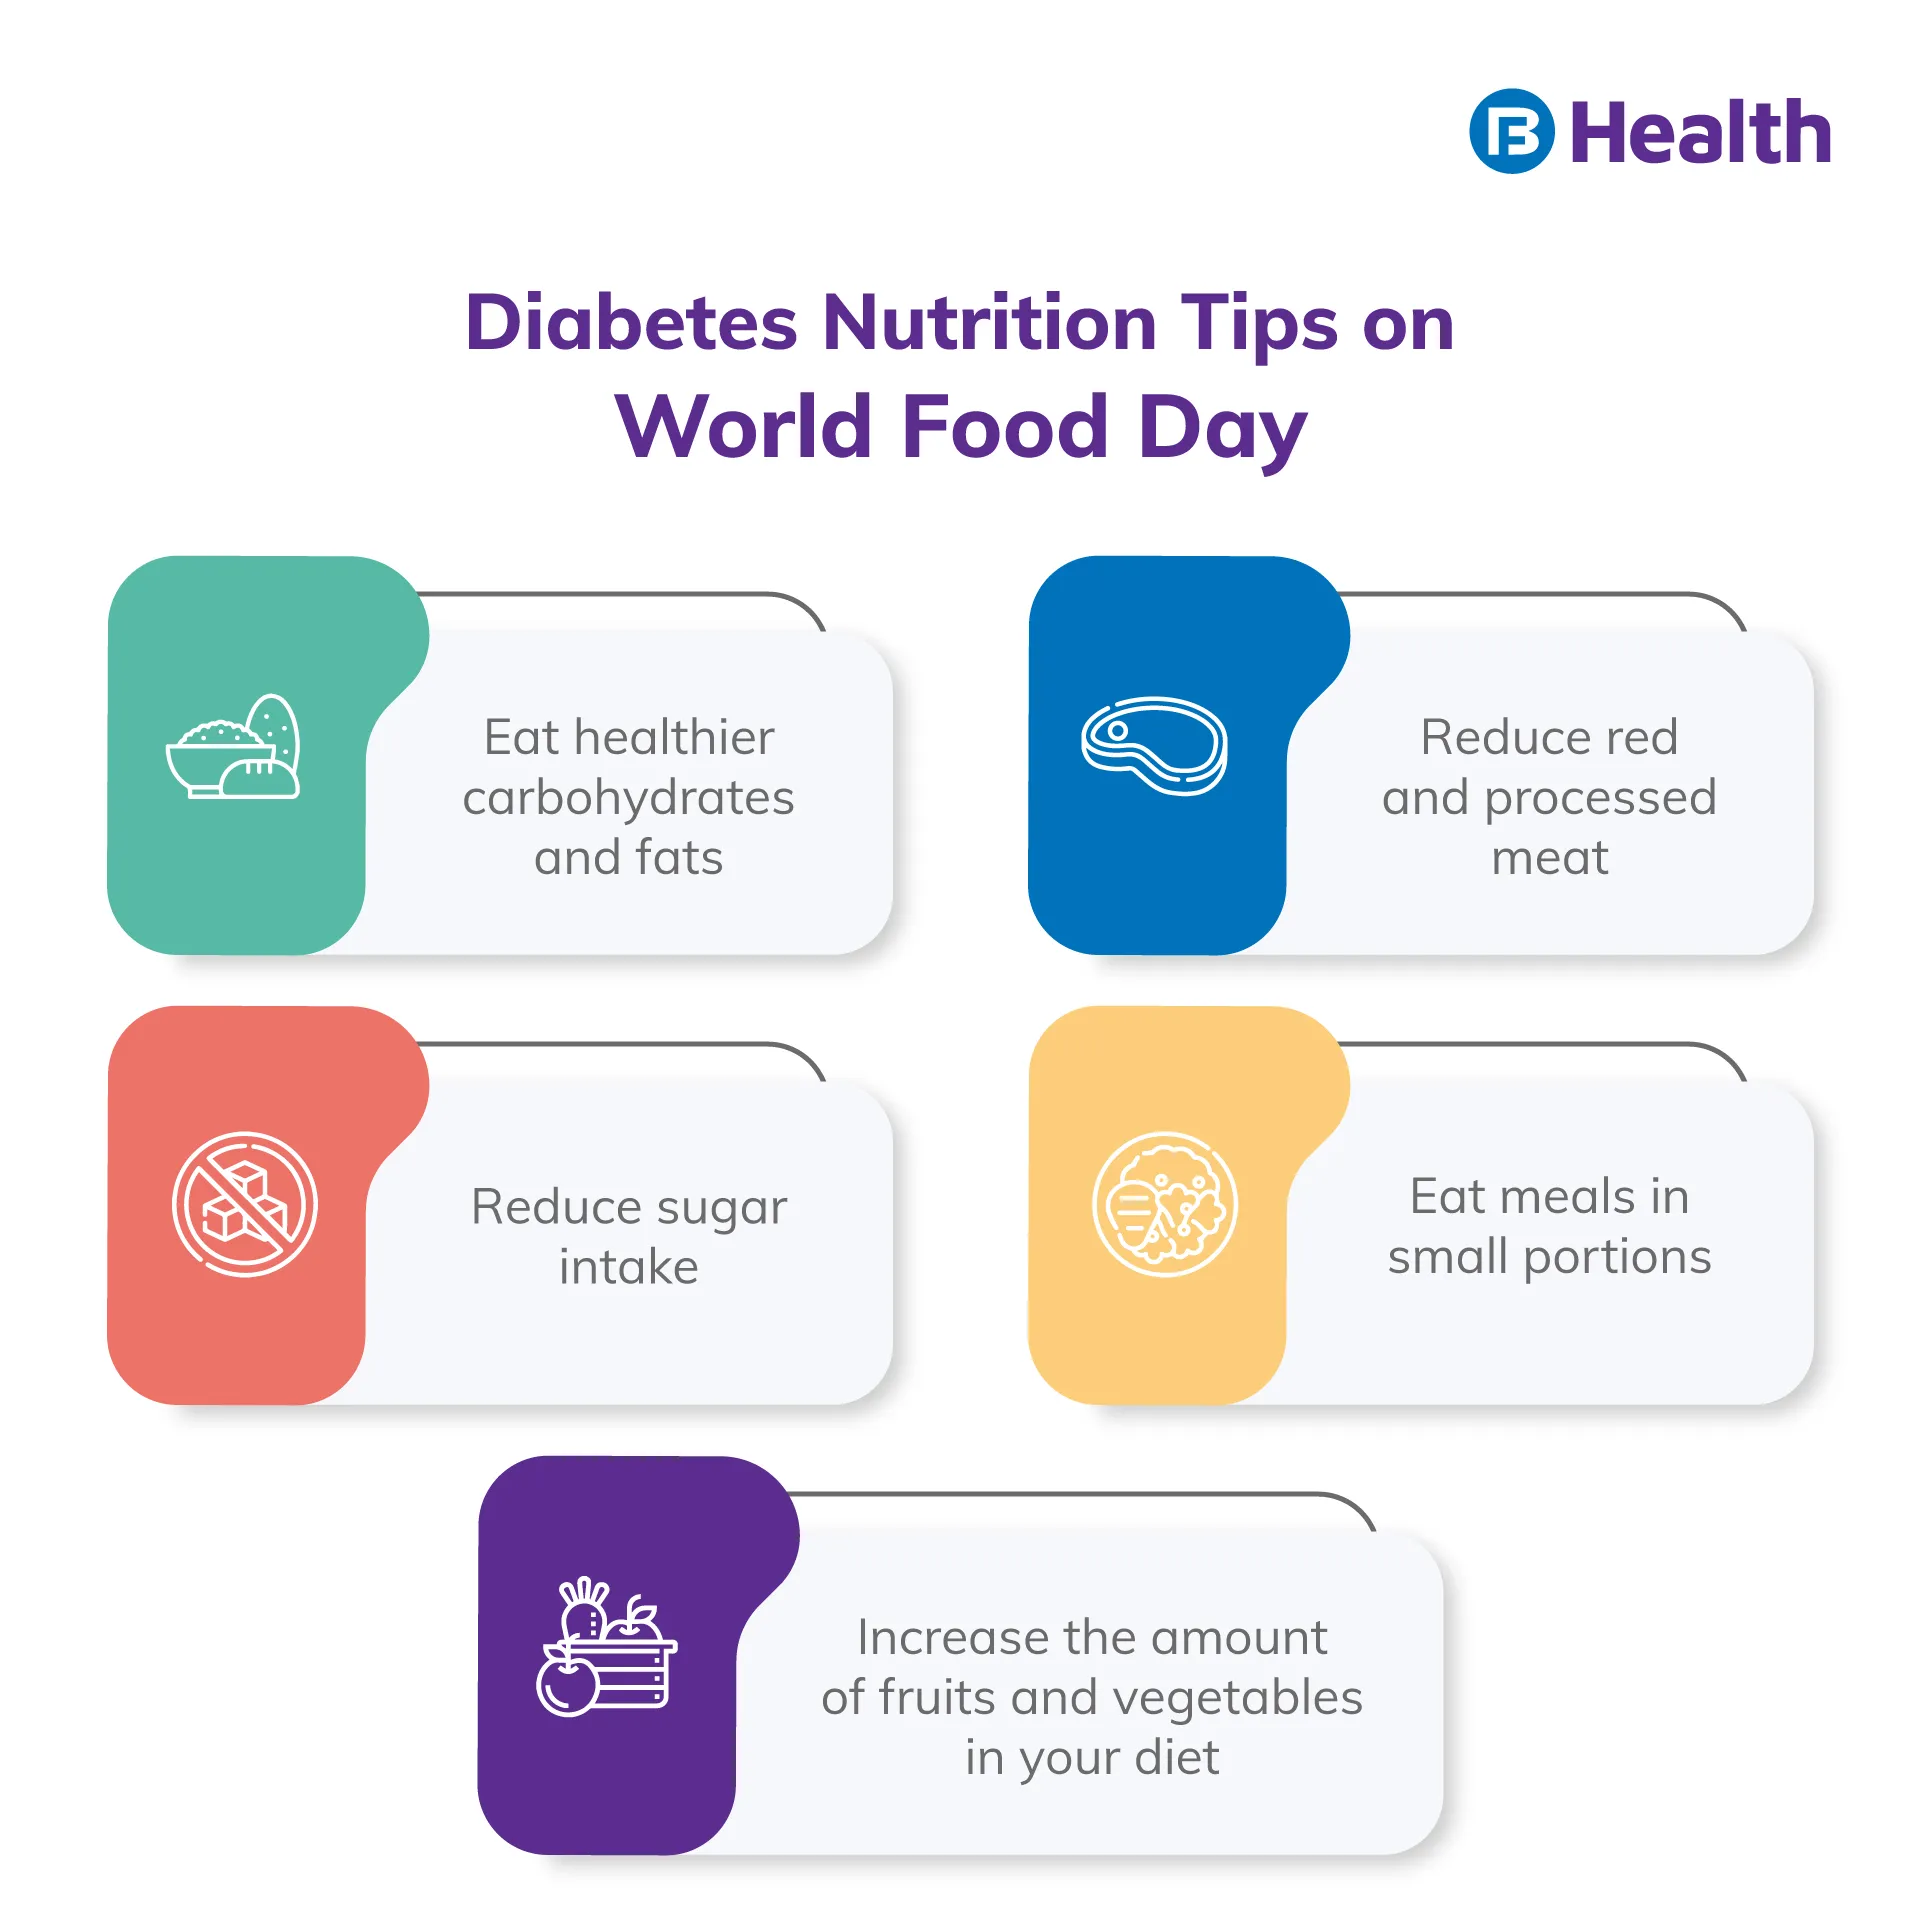 Diabetic tips on World Food Day